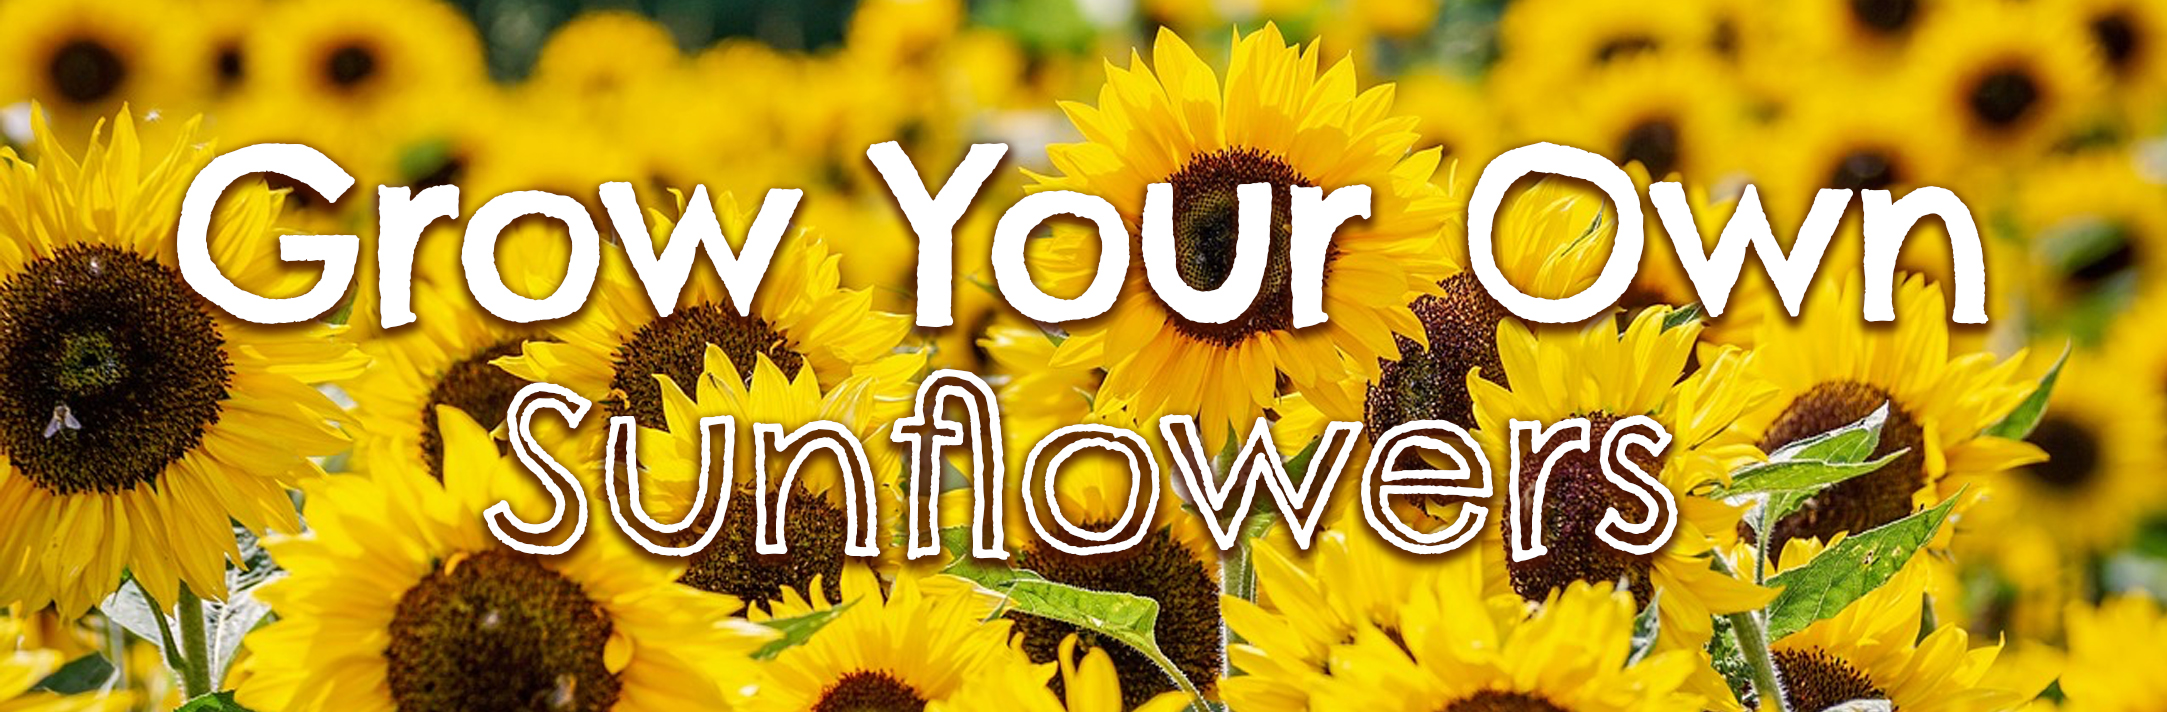 grow your own sunflower banner